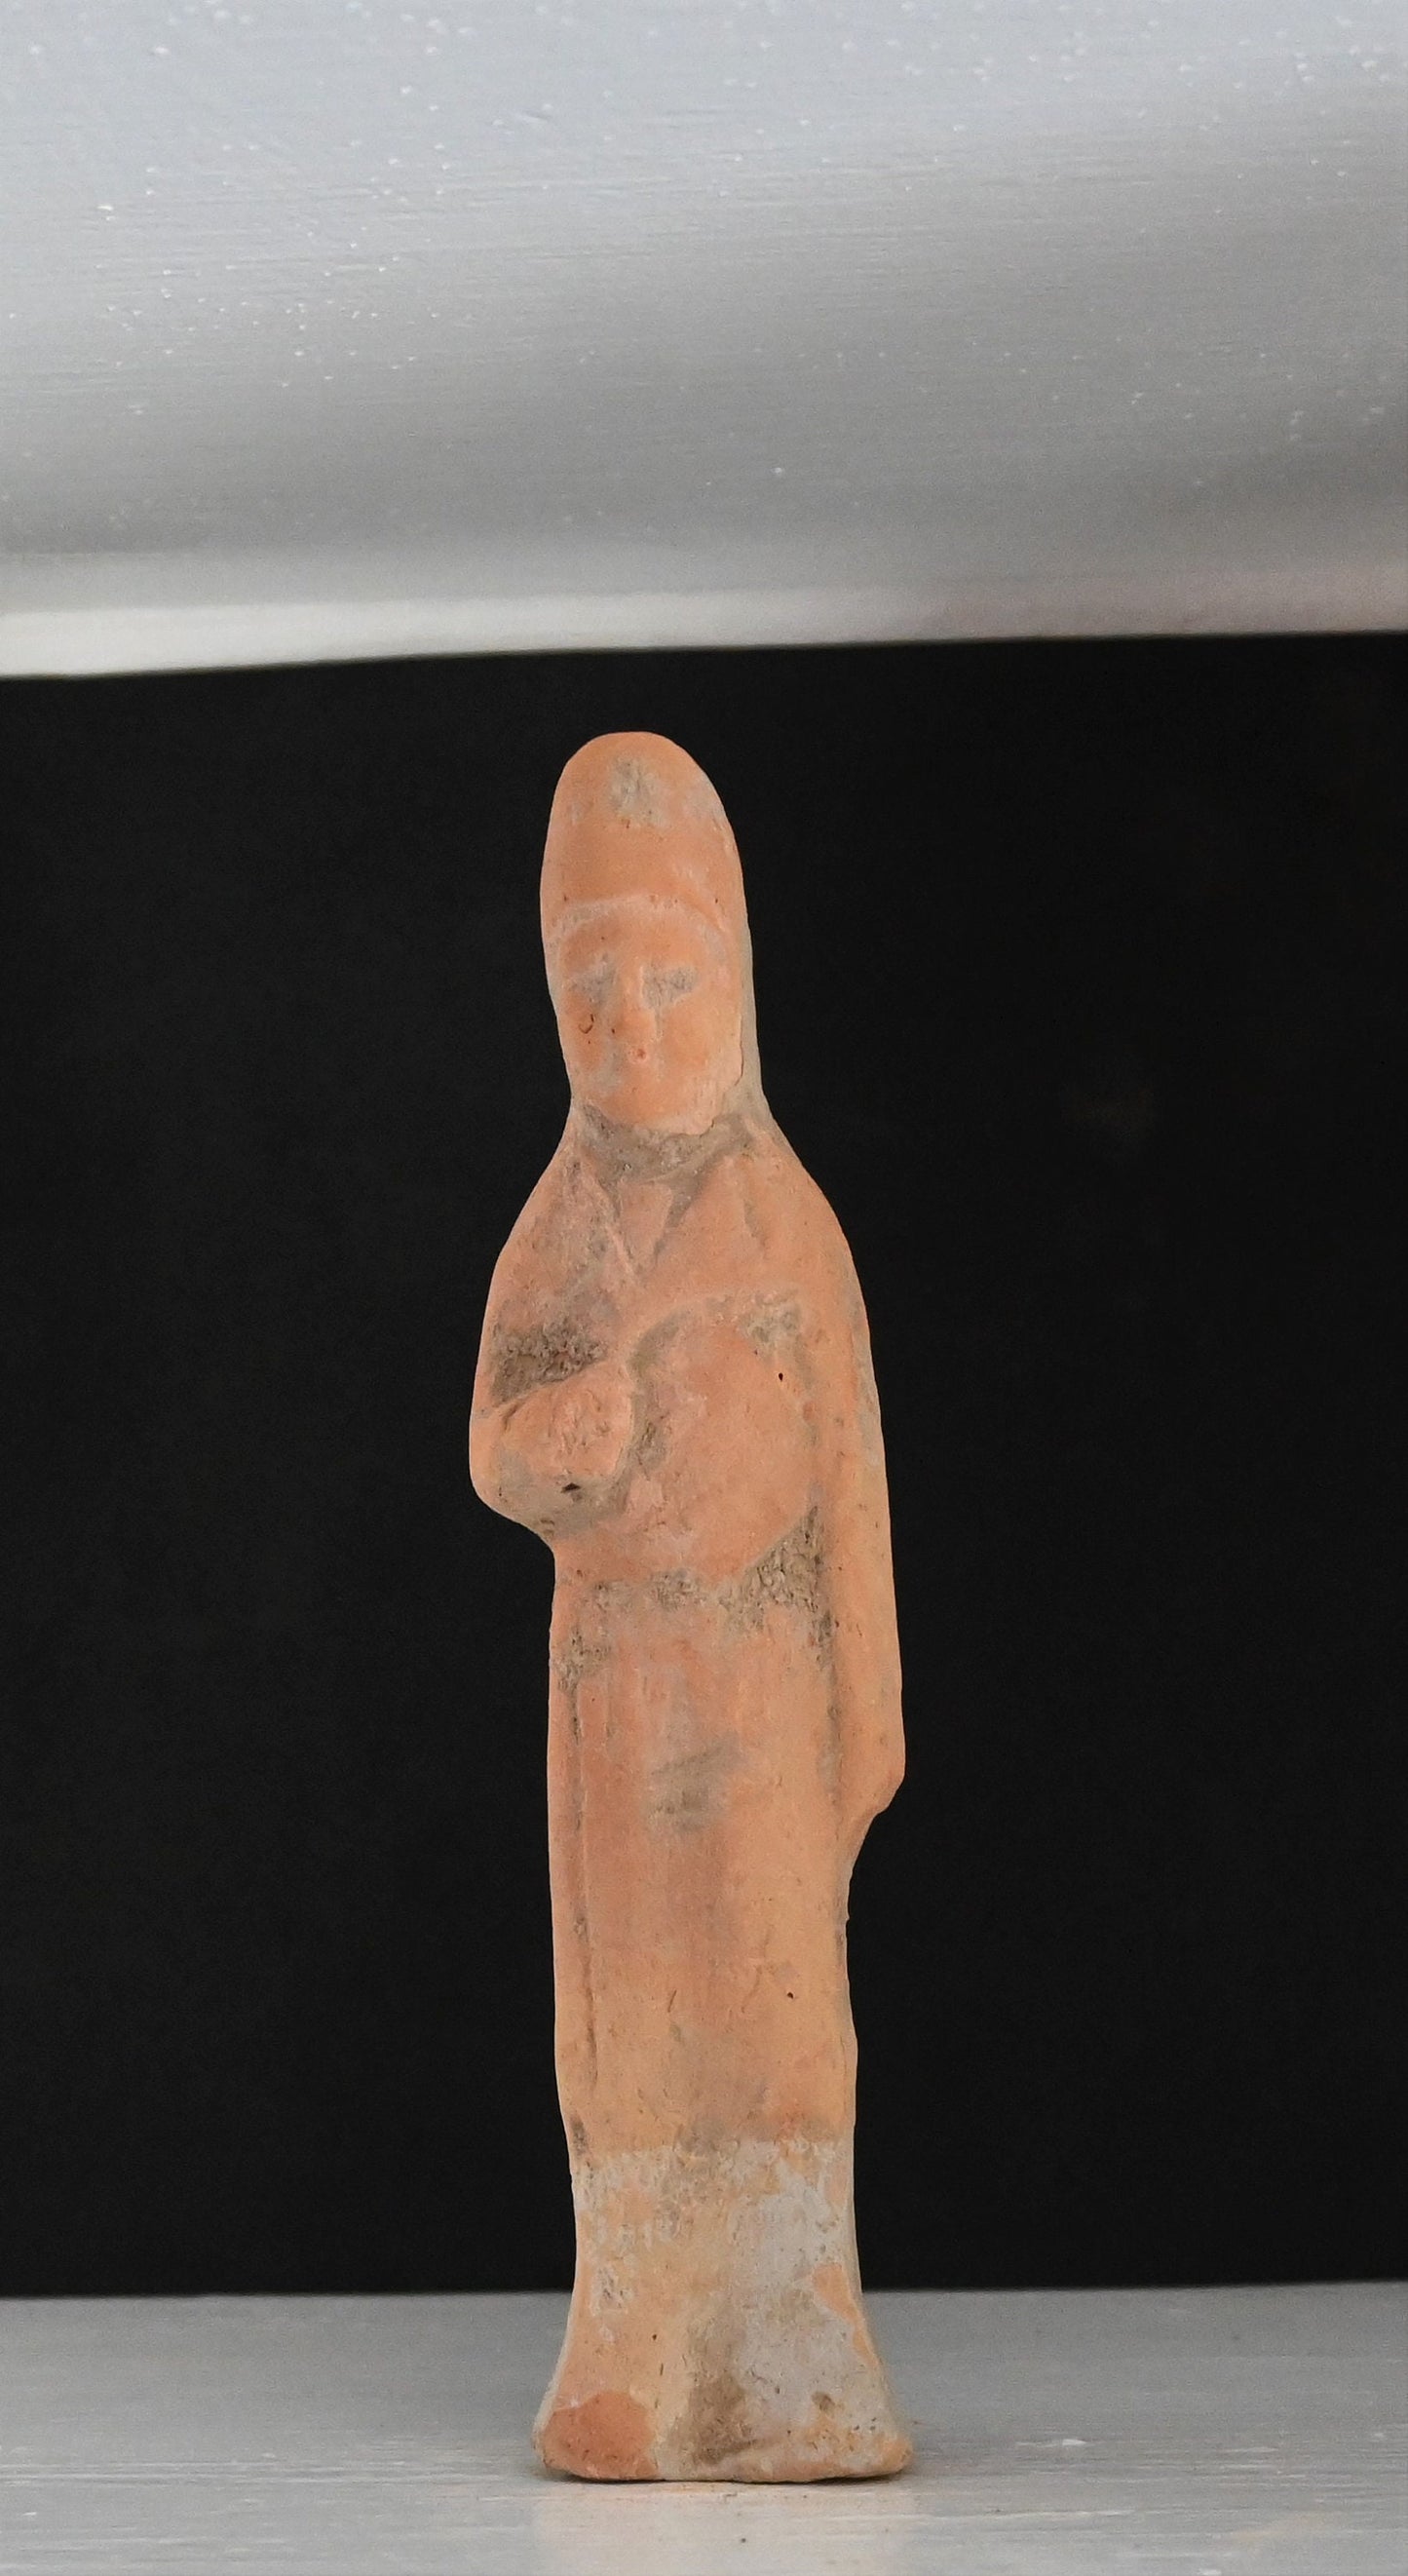 Authentic Han Dynasty, ca. 206 BCE to 220 CE mold-formed terracotta tomb attendant 7 1/2 inches with COA and provenance